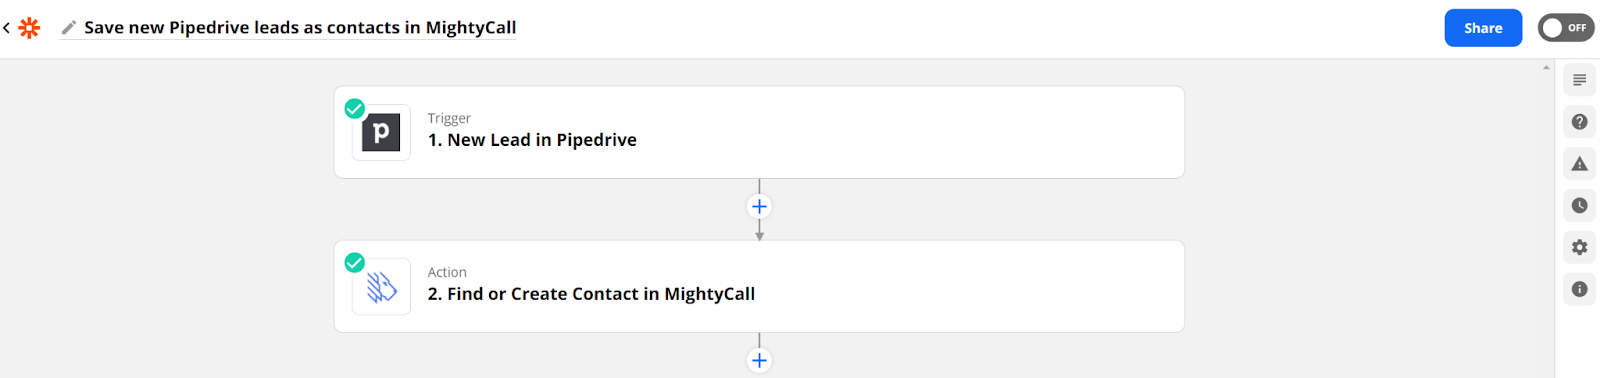 mightycall pipedrive integration